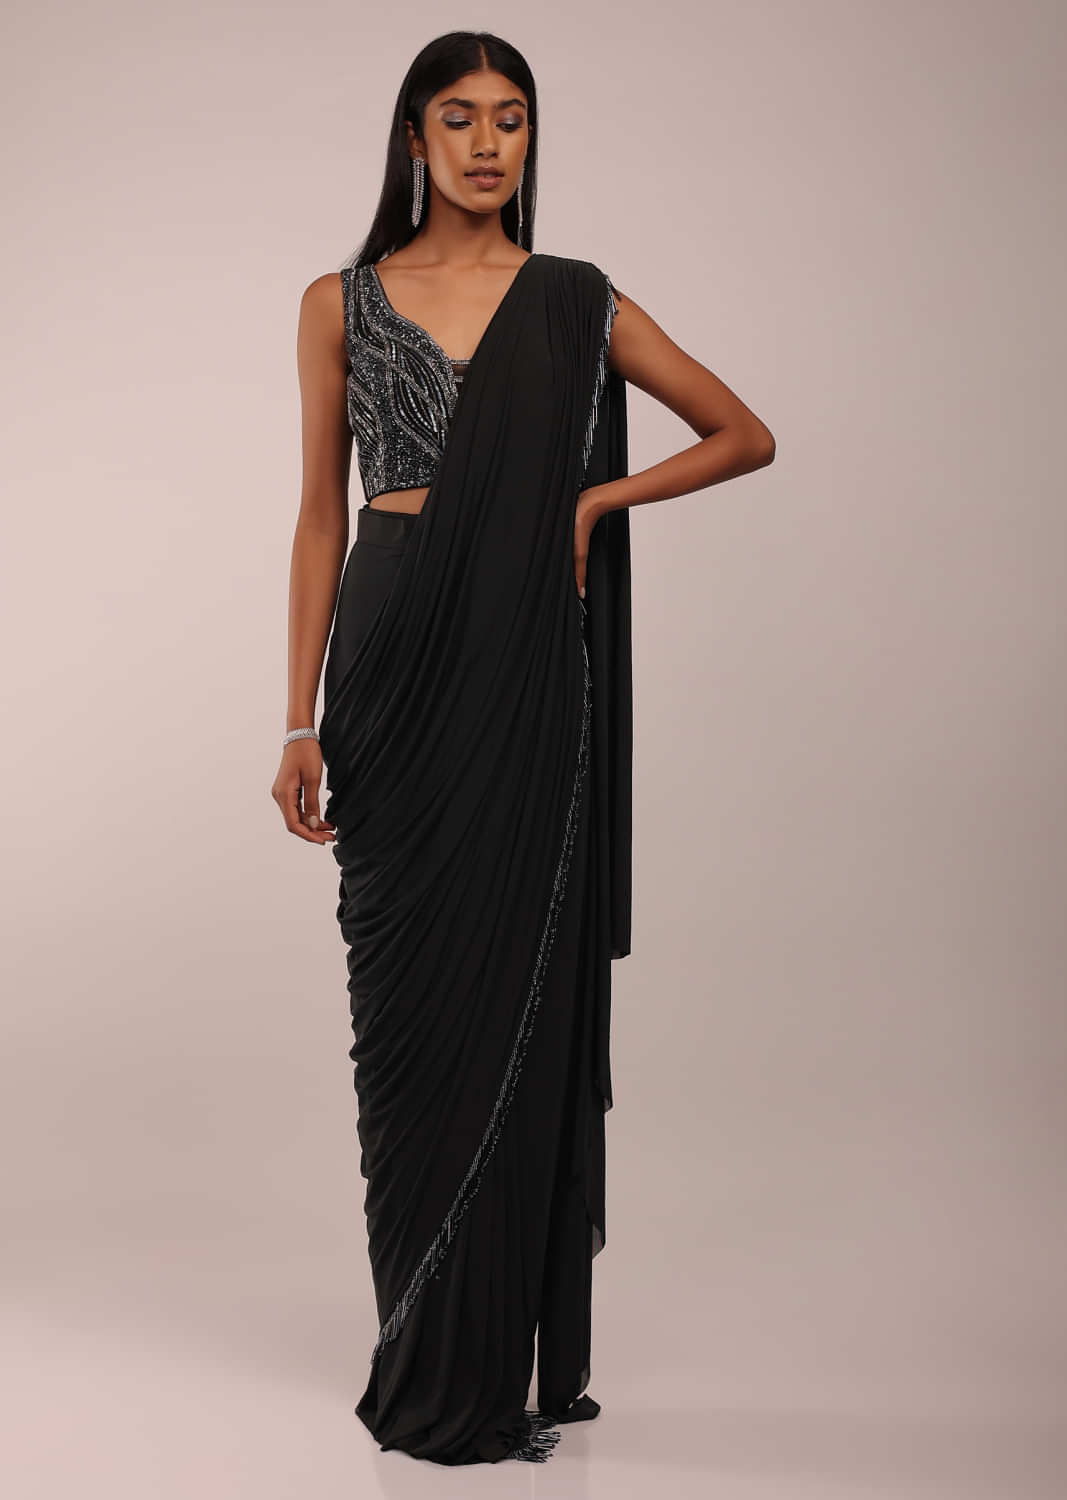 Pirate Black Ready Pleated Saree In Cut Dana Embroidery, With Beads Fringes On The Pallu Border